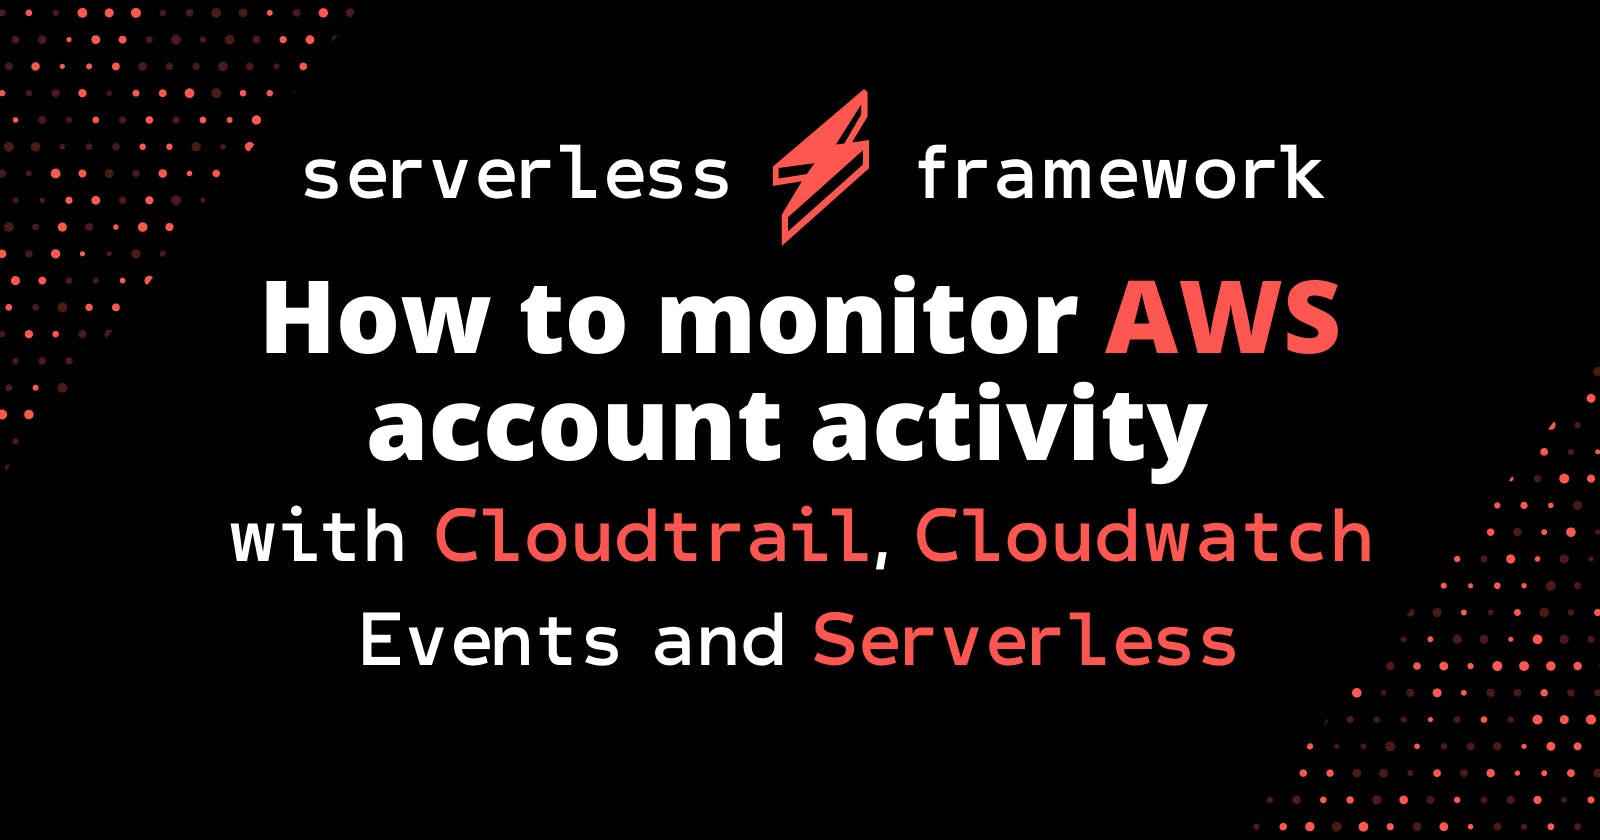 How to monitor AWS account activity with Cloudtrail, Cloudwatch Events and Serverless